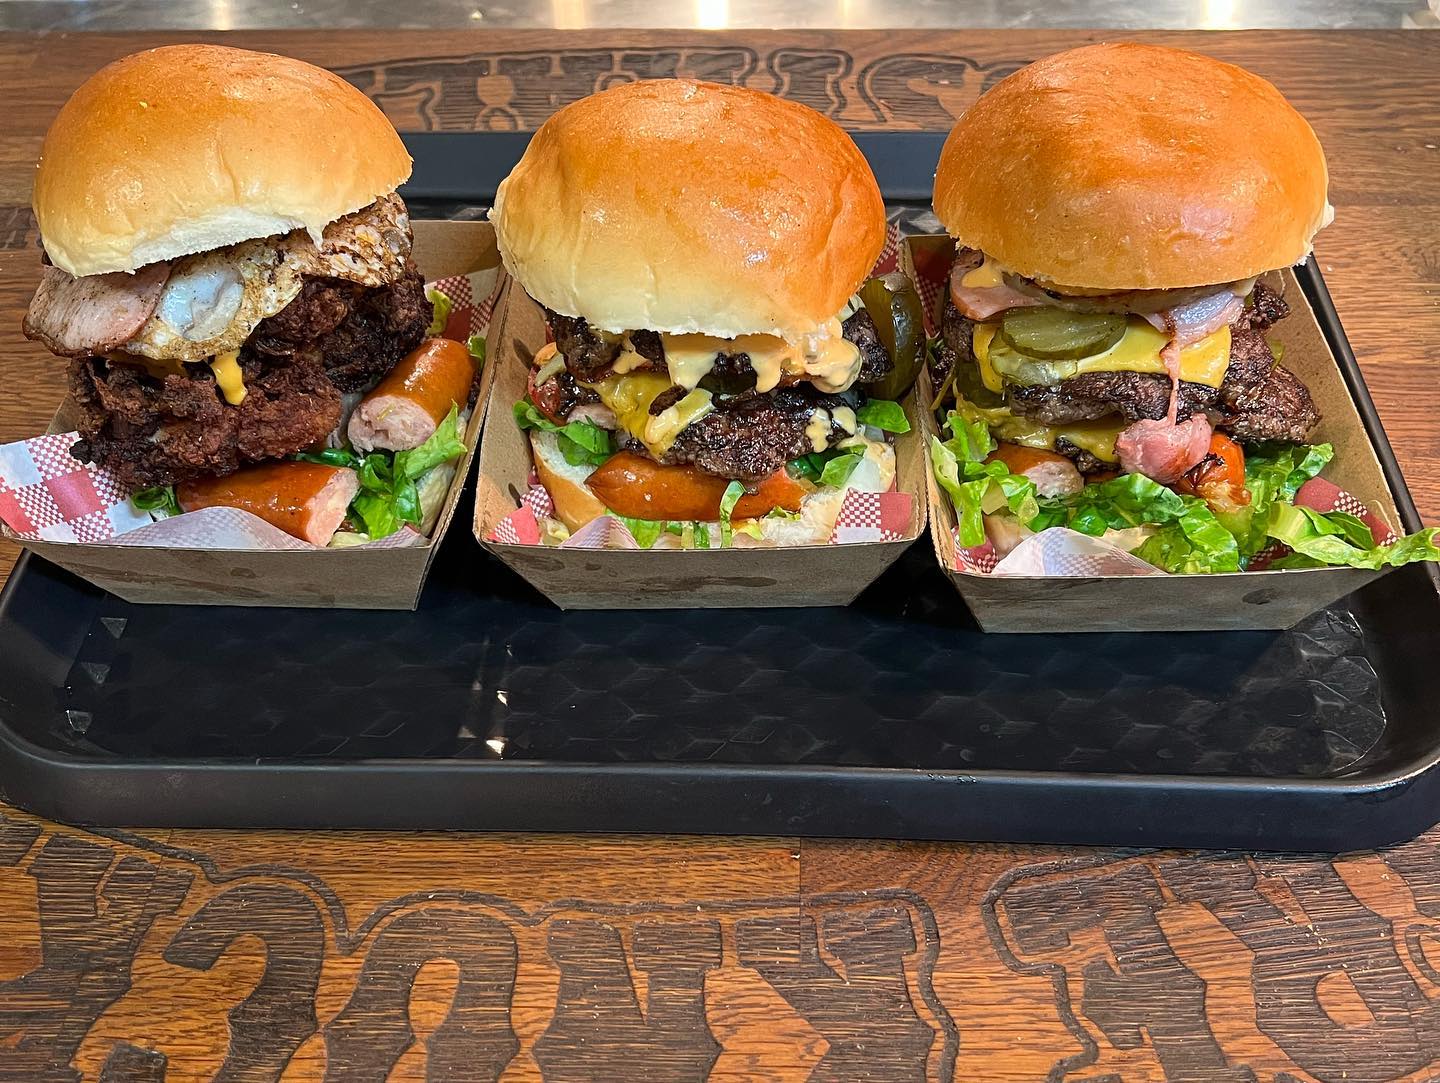 Wednesday is for monster burgers and to watch the State of Origin Grand Finale! We’re back open 5-8pm, come grab your feed before the big game!